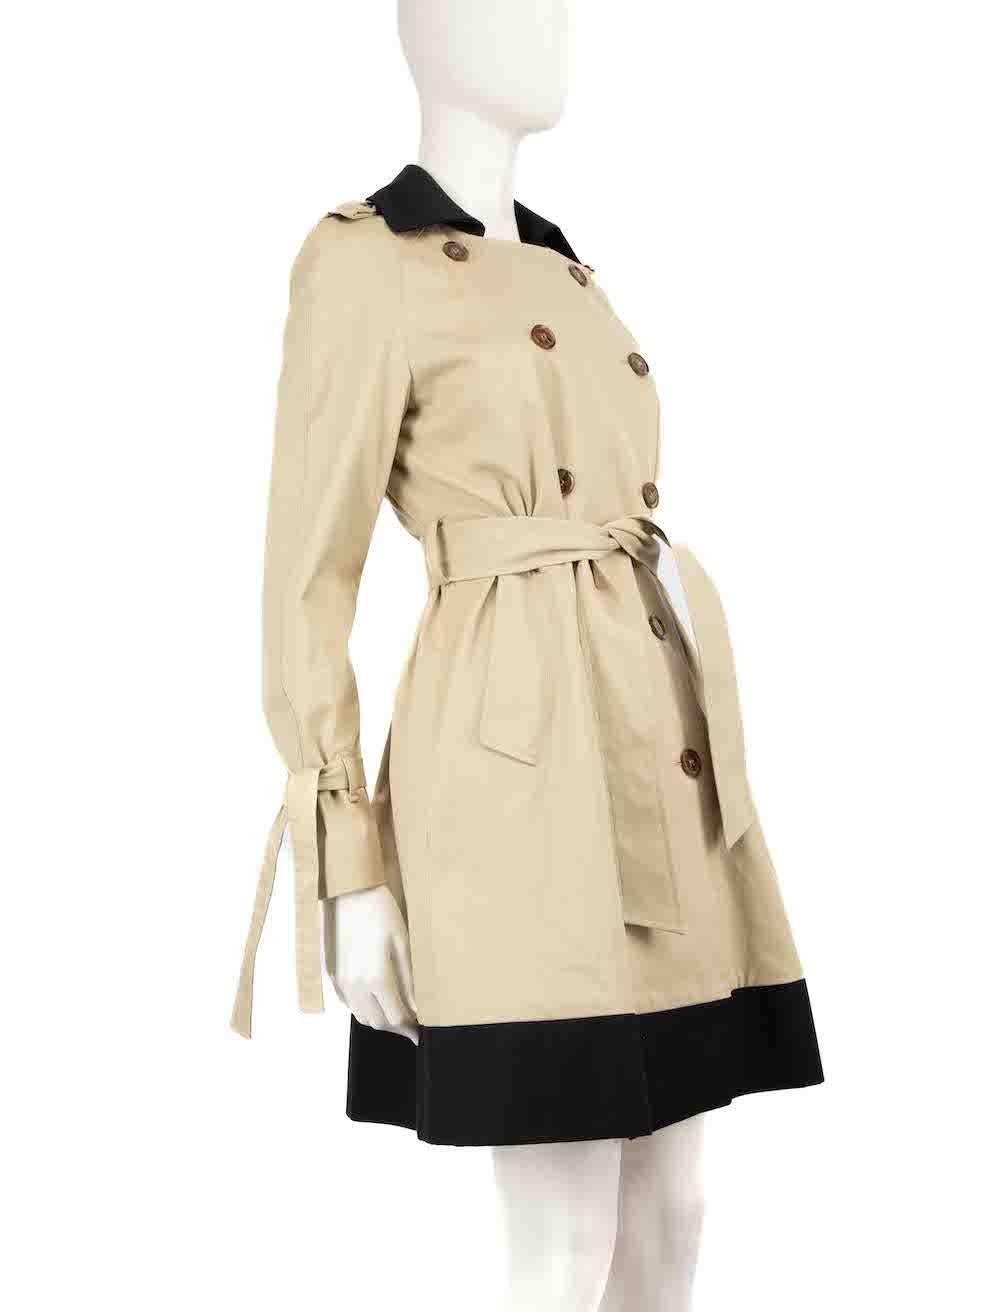 CONDITION is Very good. Hardly any visible wear to coat is evident on this used Red Valentino designer resale item.
 
 
 
 Details
 
 
 Beige
 
 Cotton
 
 Trench coat
 
 Black panel trim
 
 Double breasted
 
 Button up fastening
 
 Long sleeves
 
